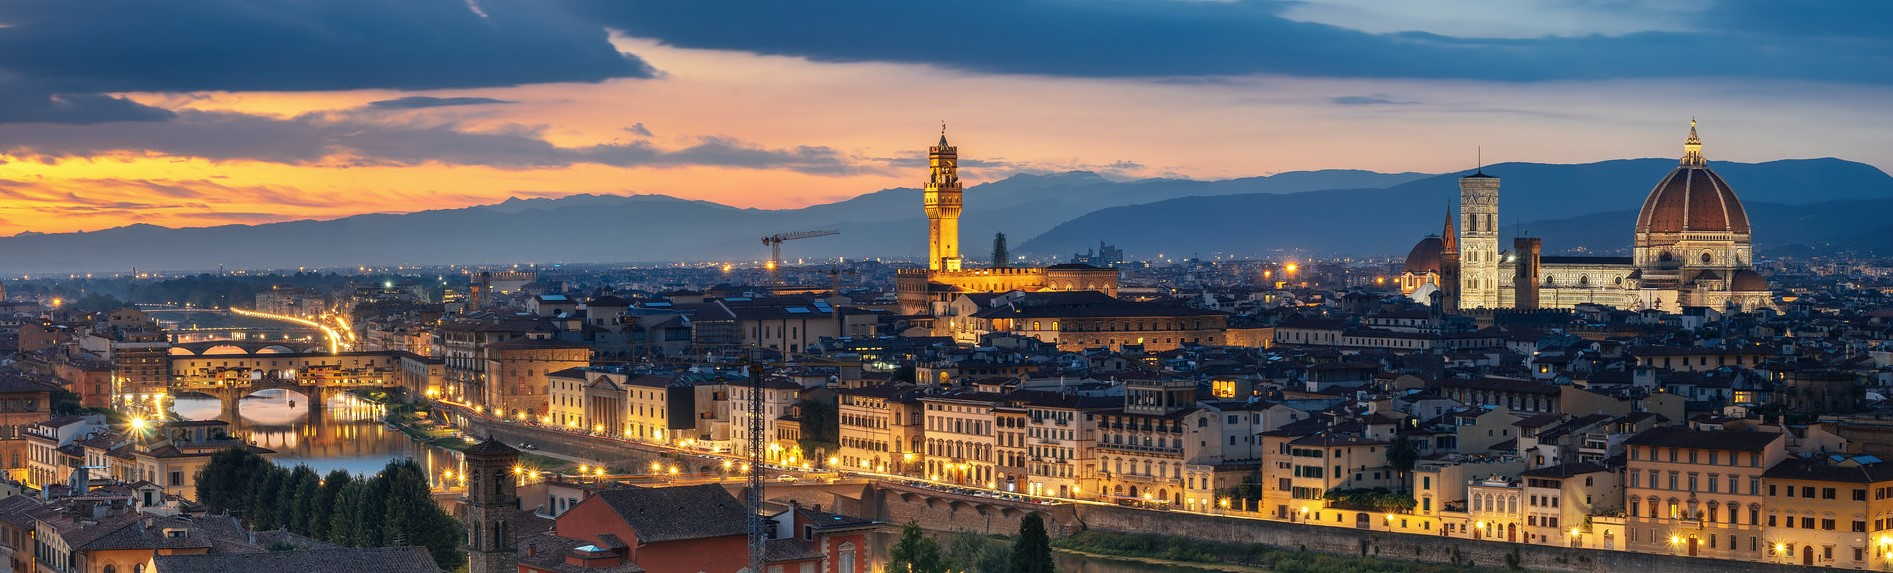 What are the best things to buy in Florence?